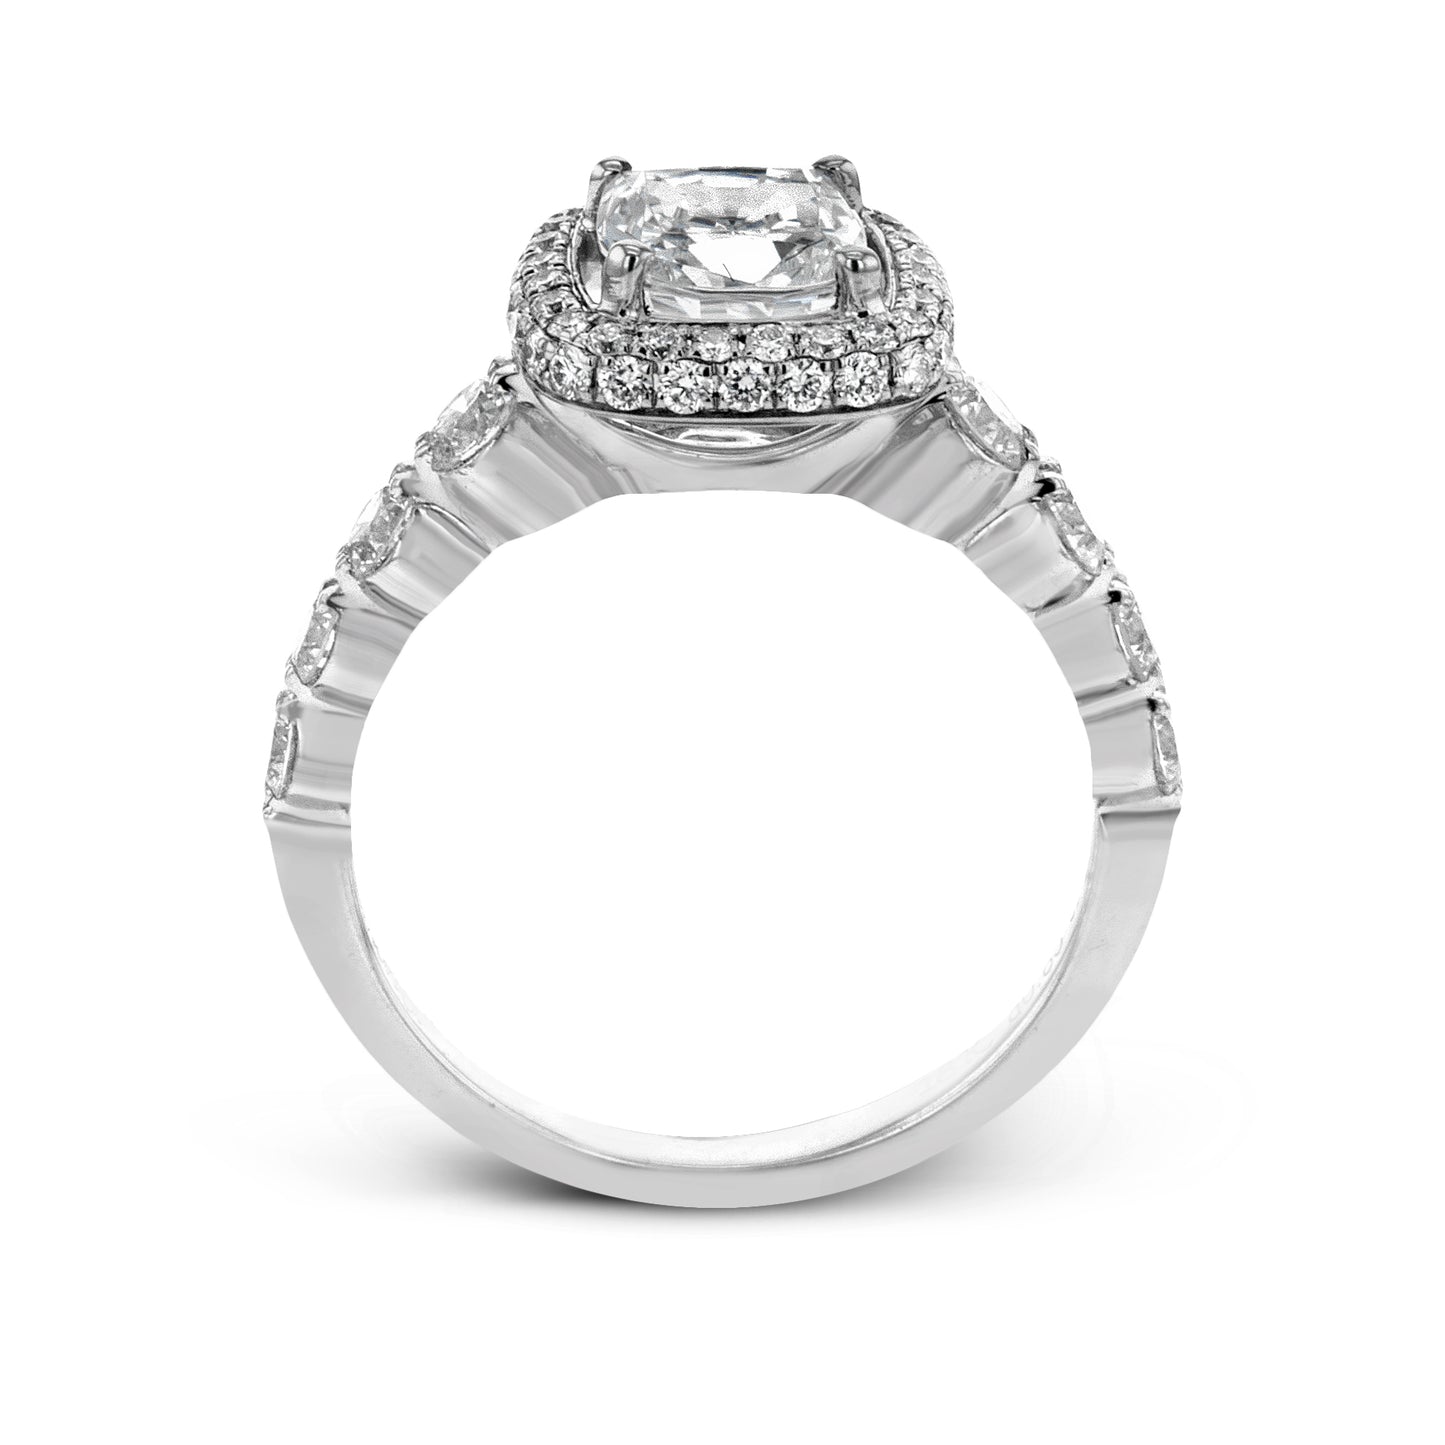 Simon G. Double Halo Pave Engagement Ring in 18K Yellow Gold